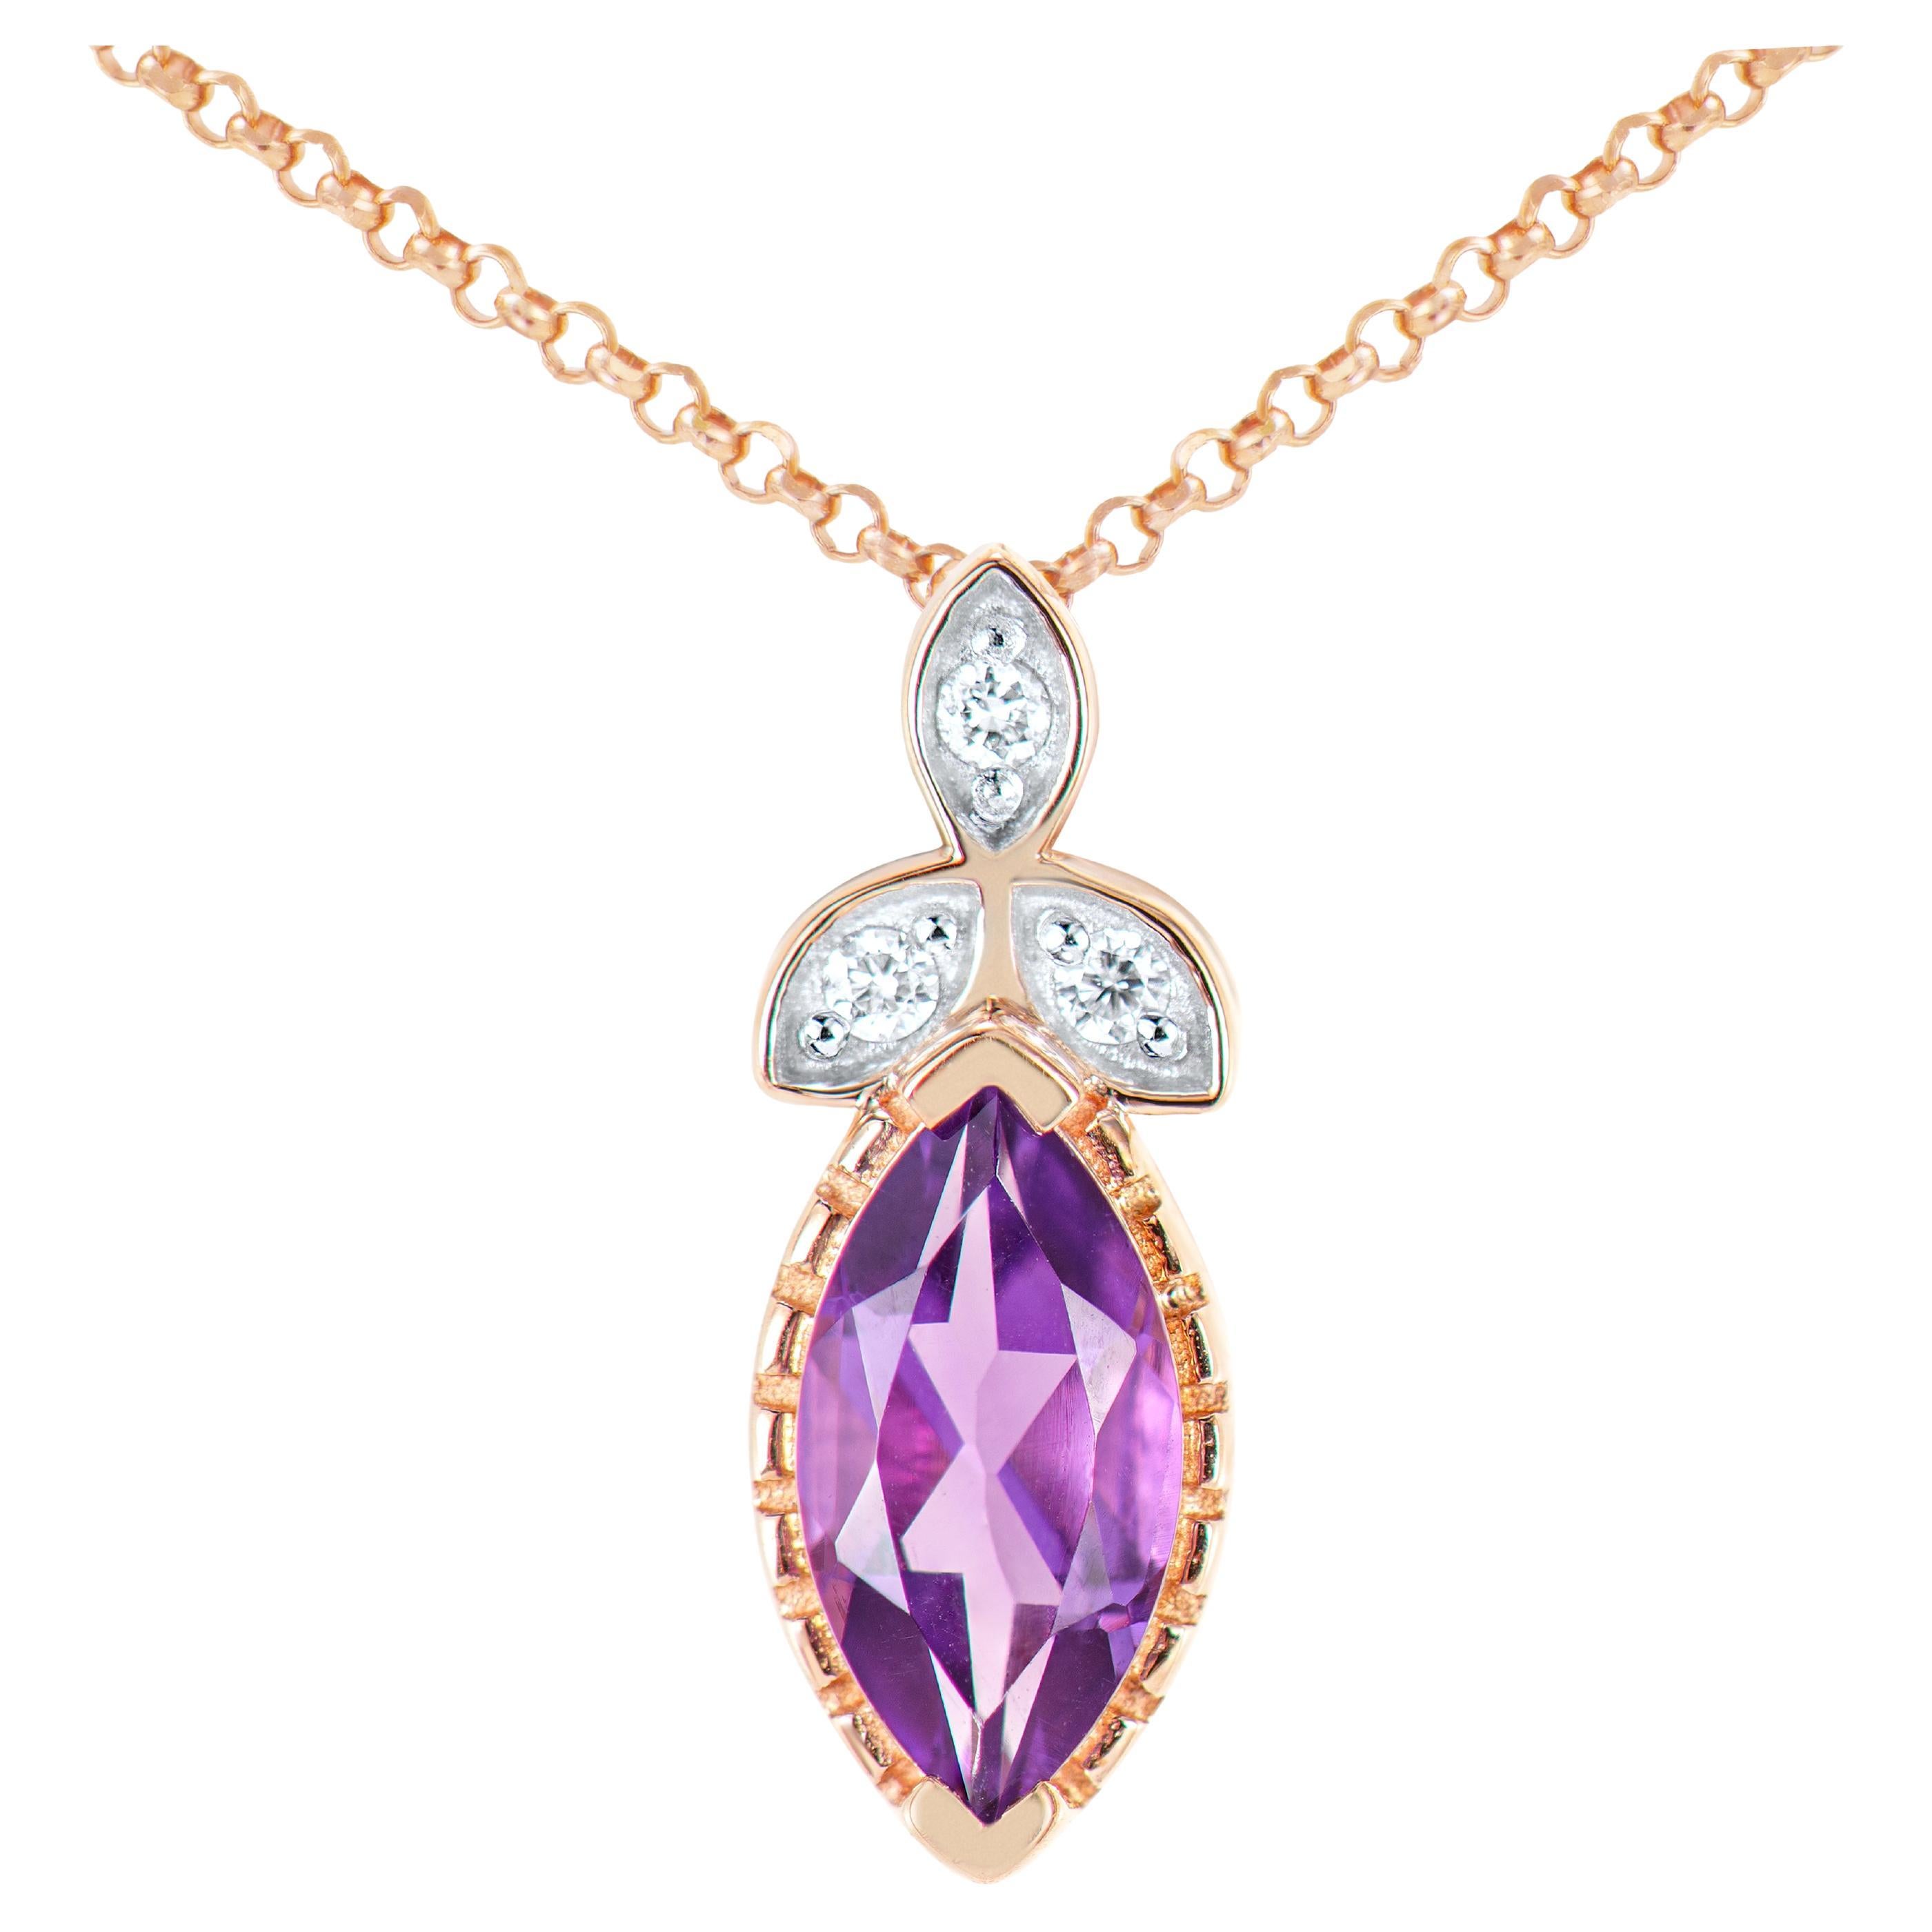 0.45 Carat Amethyst Pendant in 14Karat Rose Gold with White Diamond. For Sale